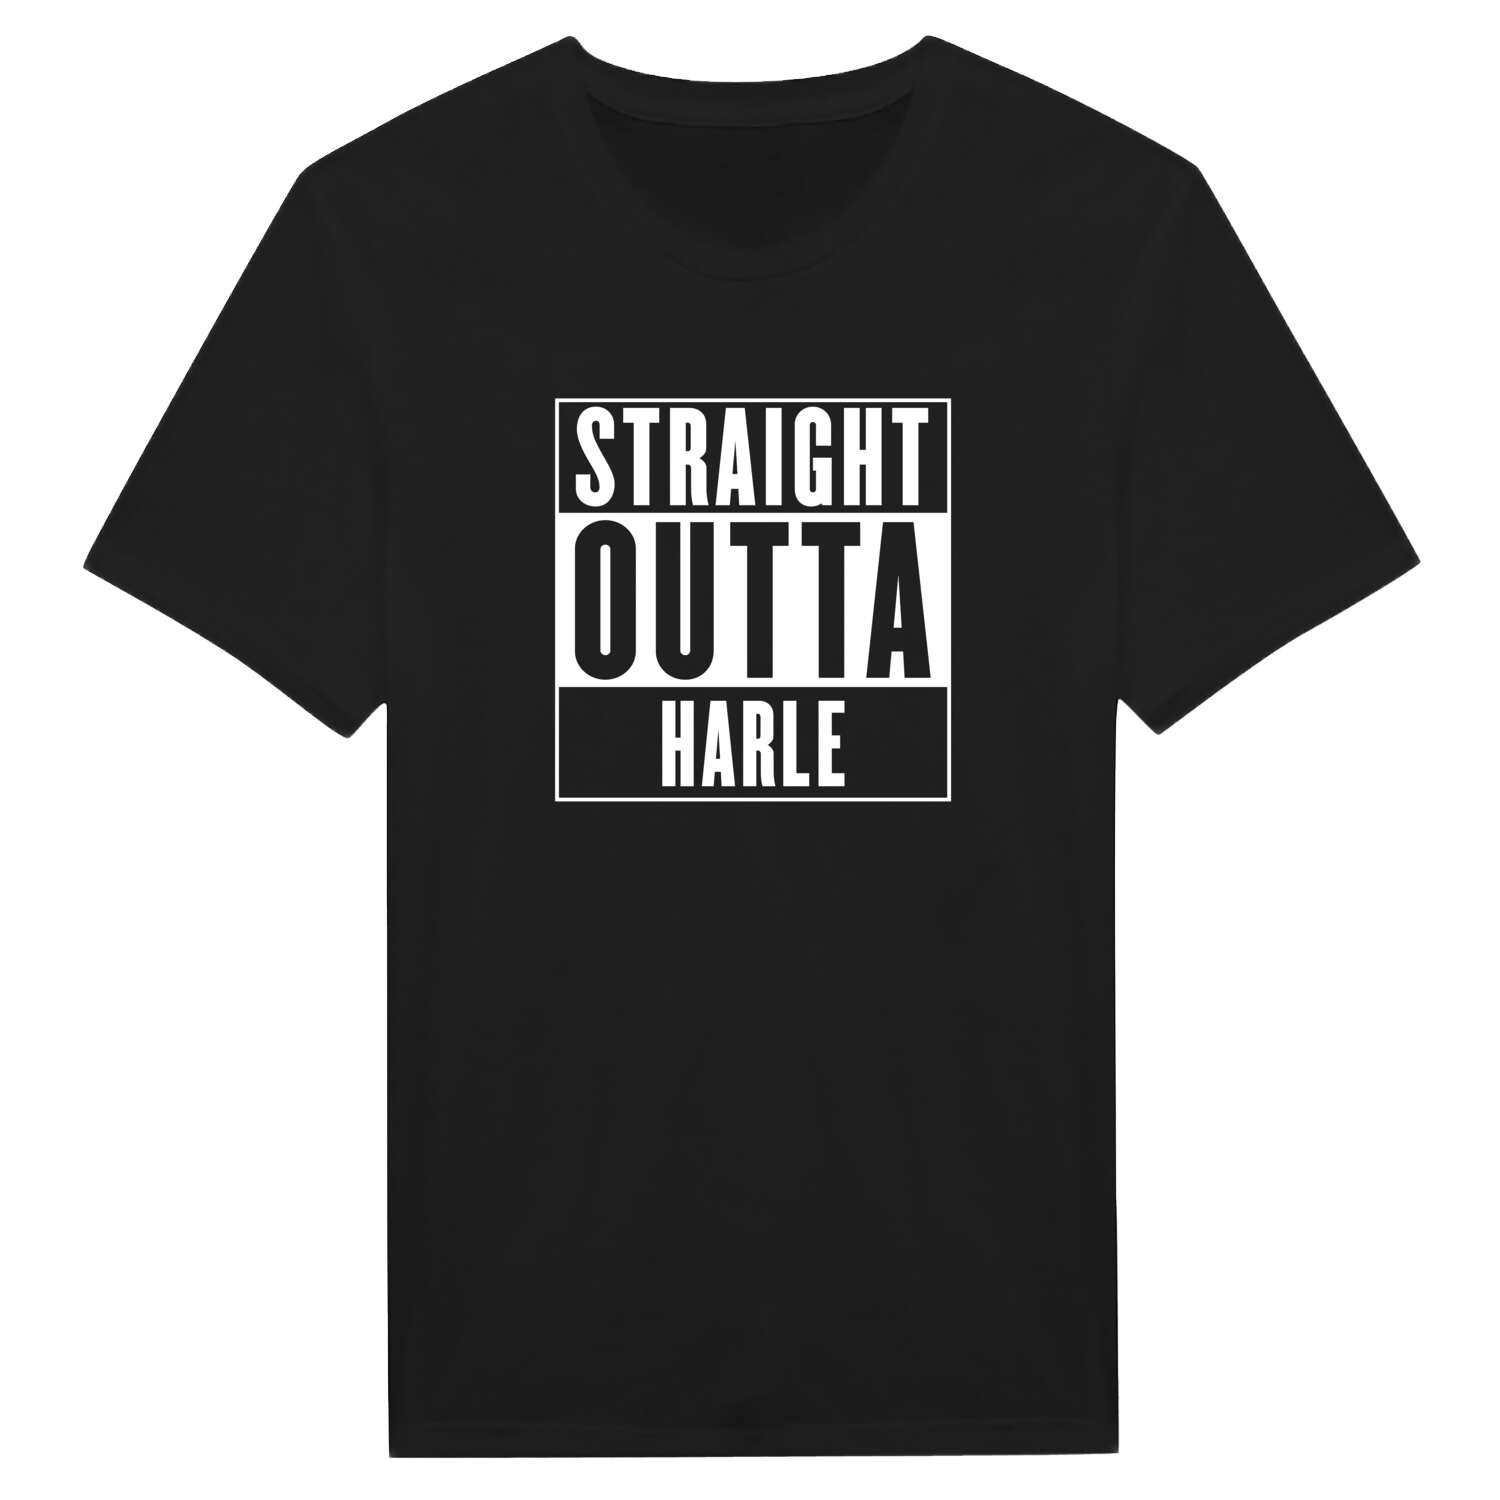 Harle T-Shirt »Straight Outta«